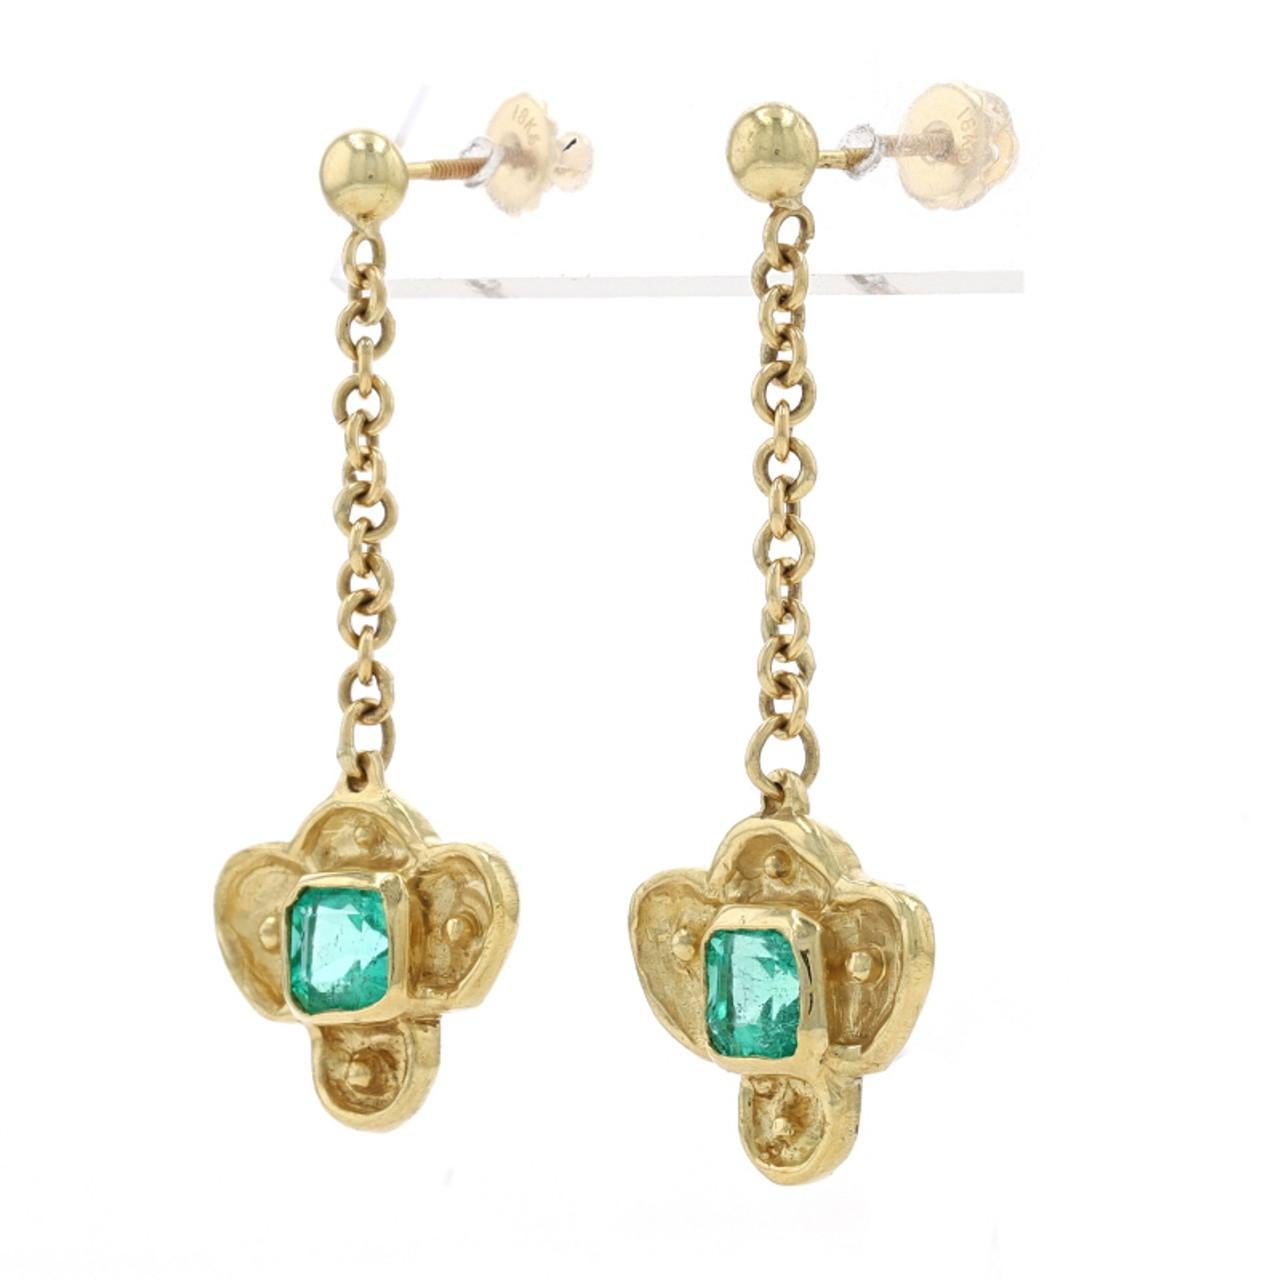 Yellow Gold Emerald Dangle Earrings 18k Square 2.04ctw Flowers Pierced

Stone Information:
Natural Emeralds
Treatment: Oiling
Carat(s): 2.04ctw
Cut: Square
Color: Green
Stone Note: Colombian
Total Carats: 2.04ctw

Additional Information:
Material: